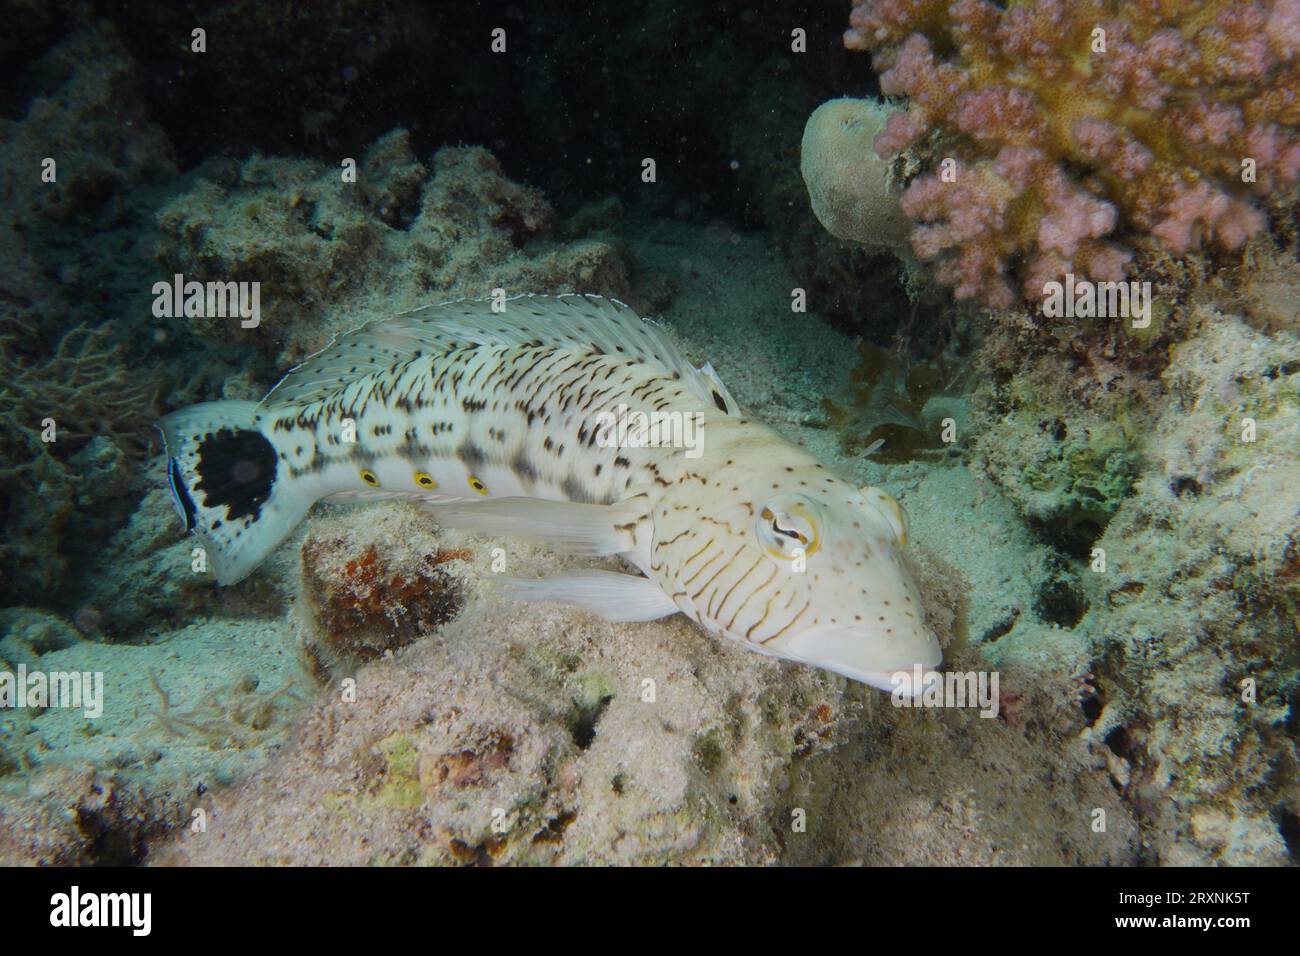 Speckled sandperch (Parapercis hexophthalma), House reef dive site, Mangrove Bay, El Quesir, Red Sea, Egypt Stock Photo